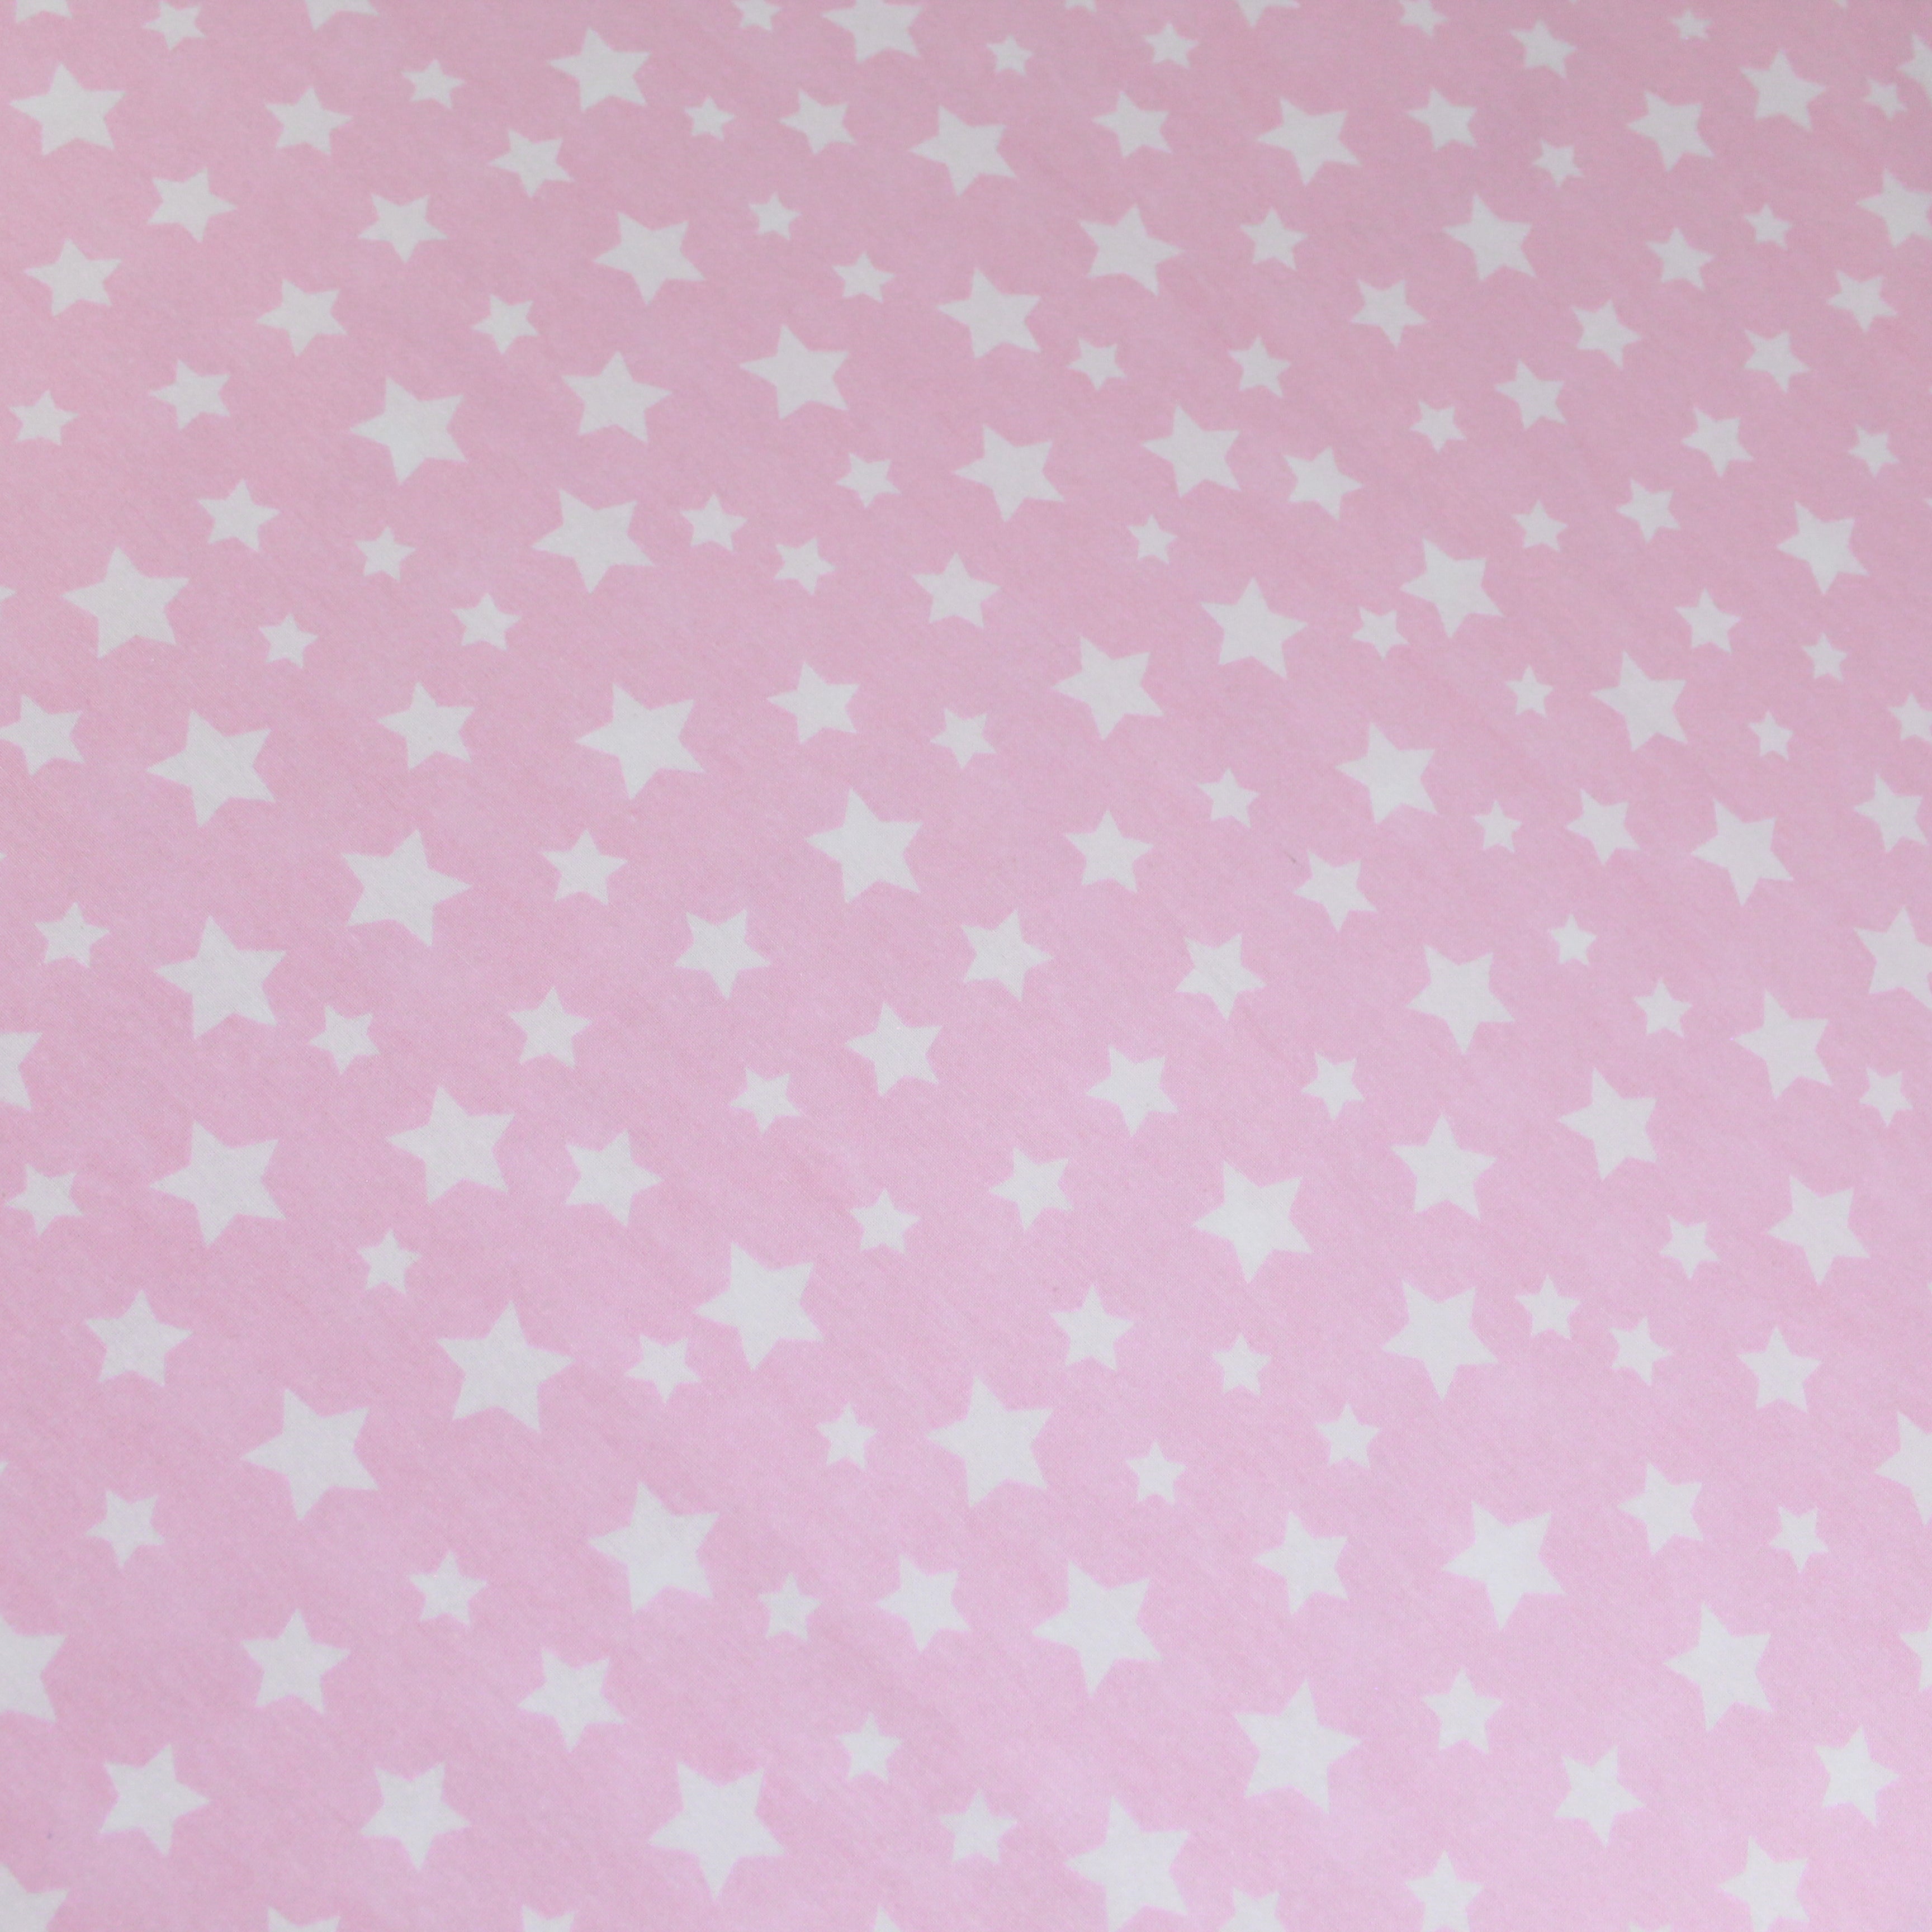 Premium Quality Super Wide Cotton Blend Sheeting "Little White Stars" 94" Wide Pink